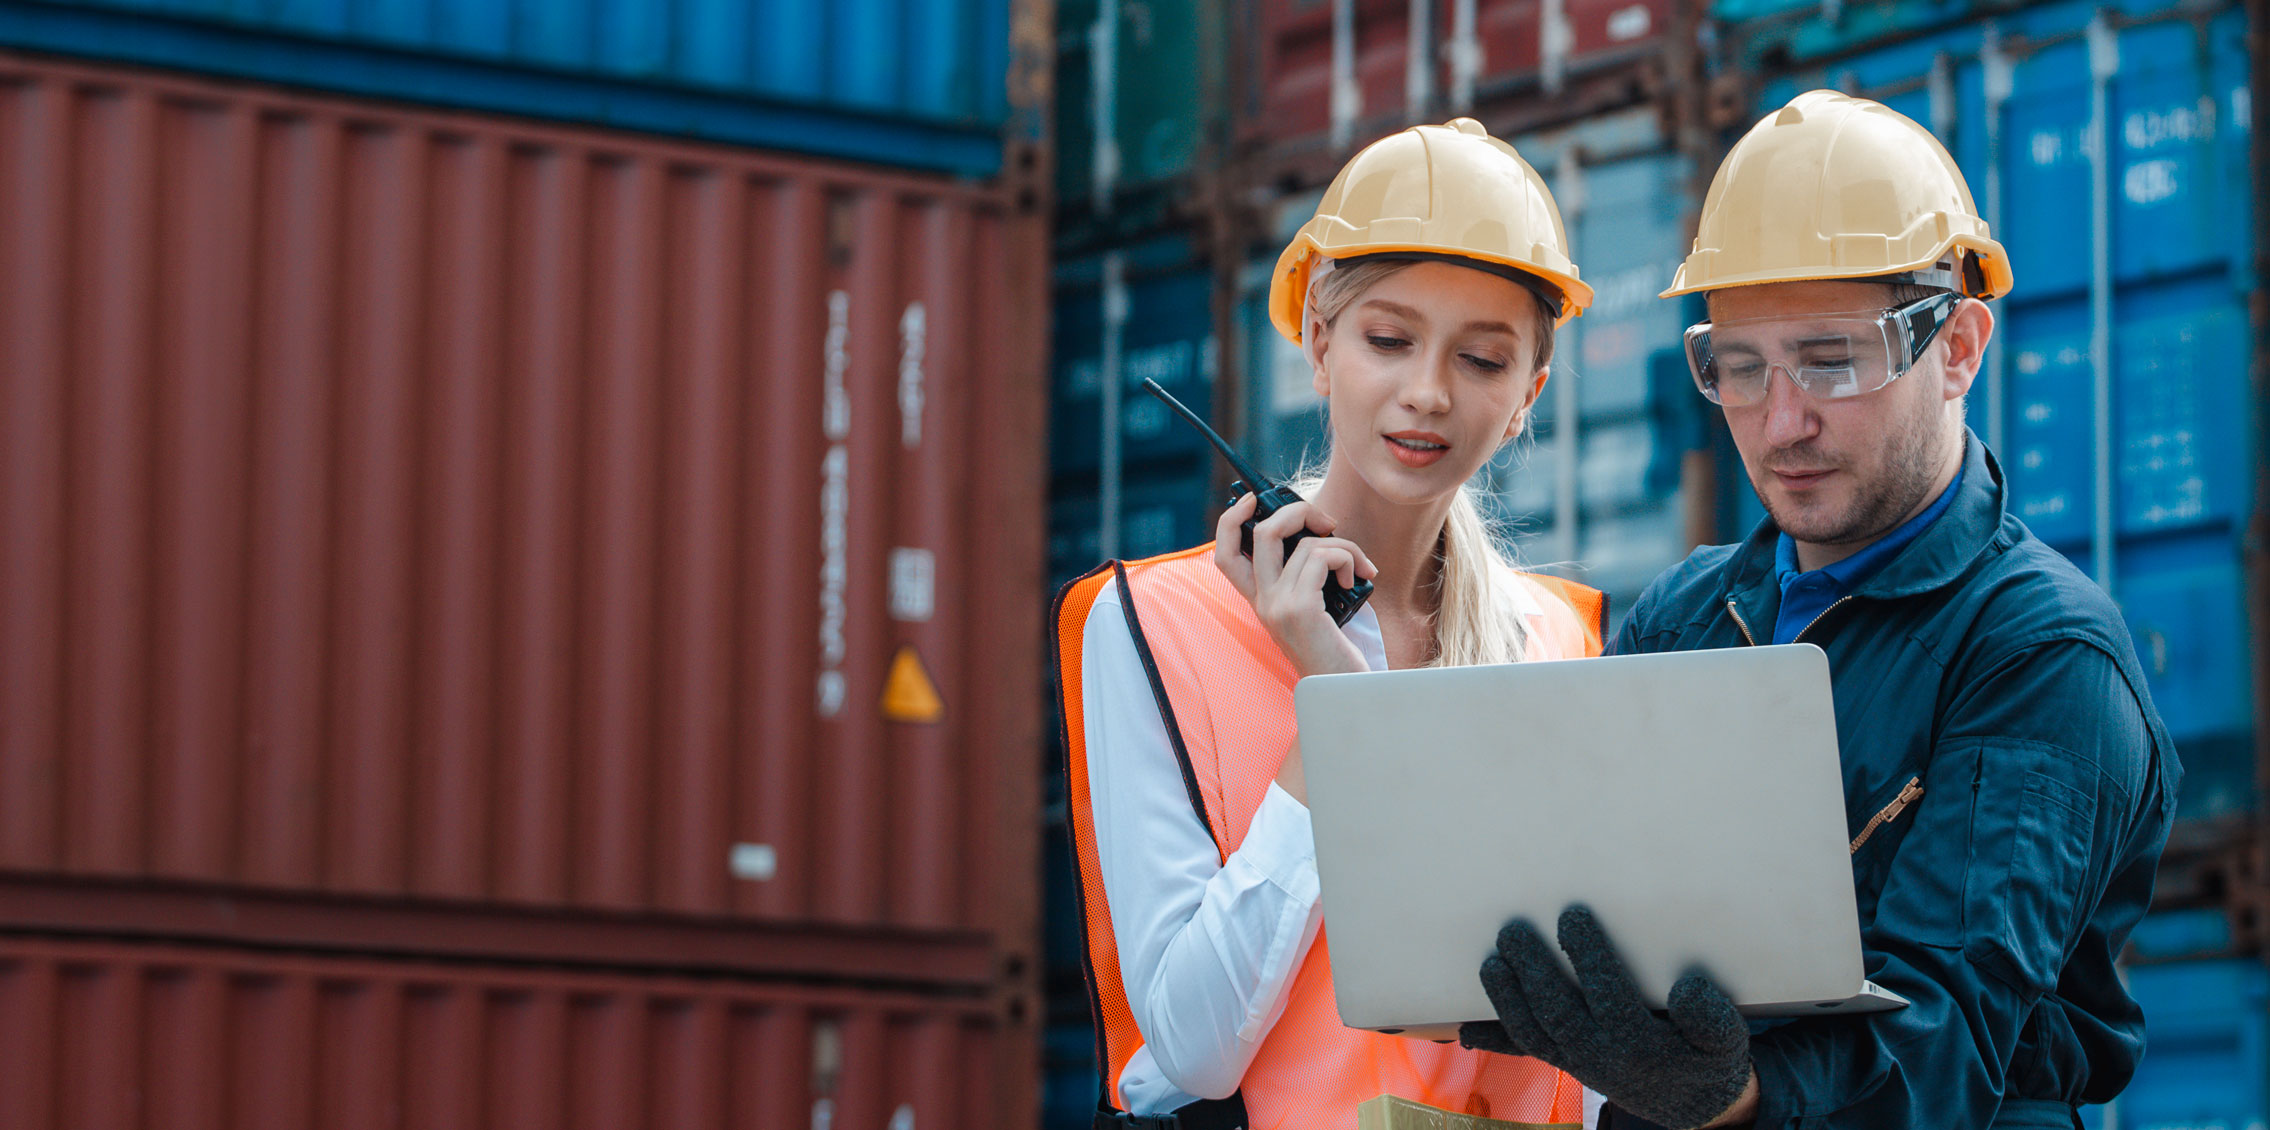 How Revenue Intelligence Can Help Against Supply Chain Disruption